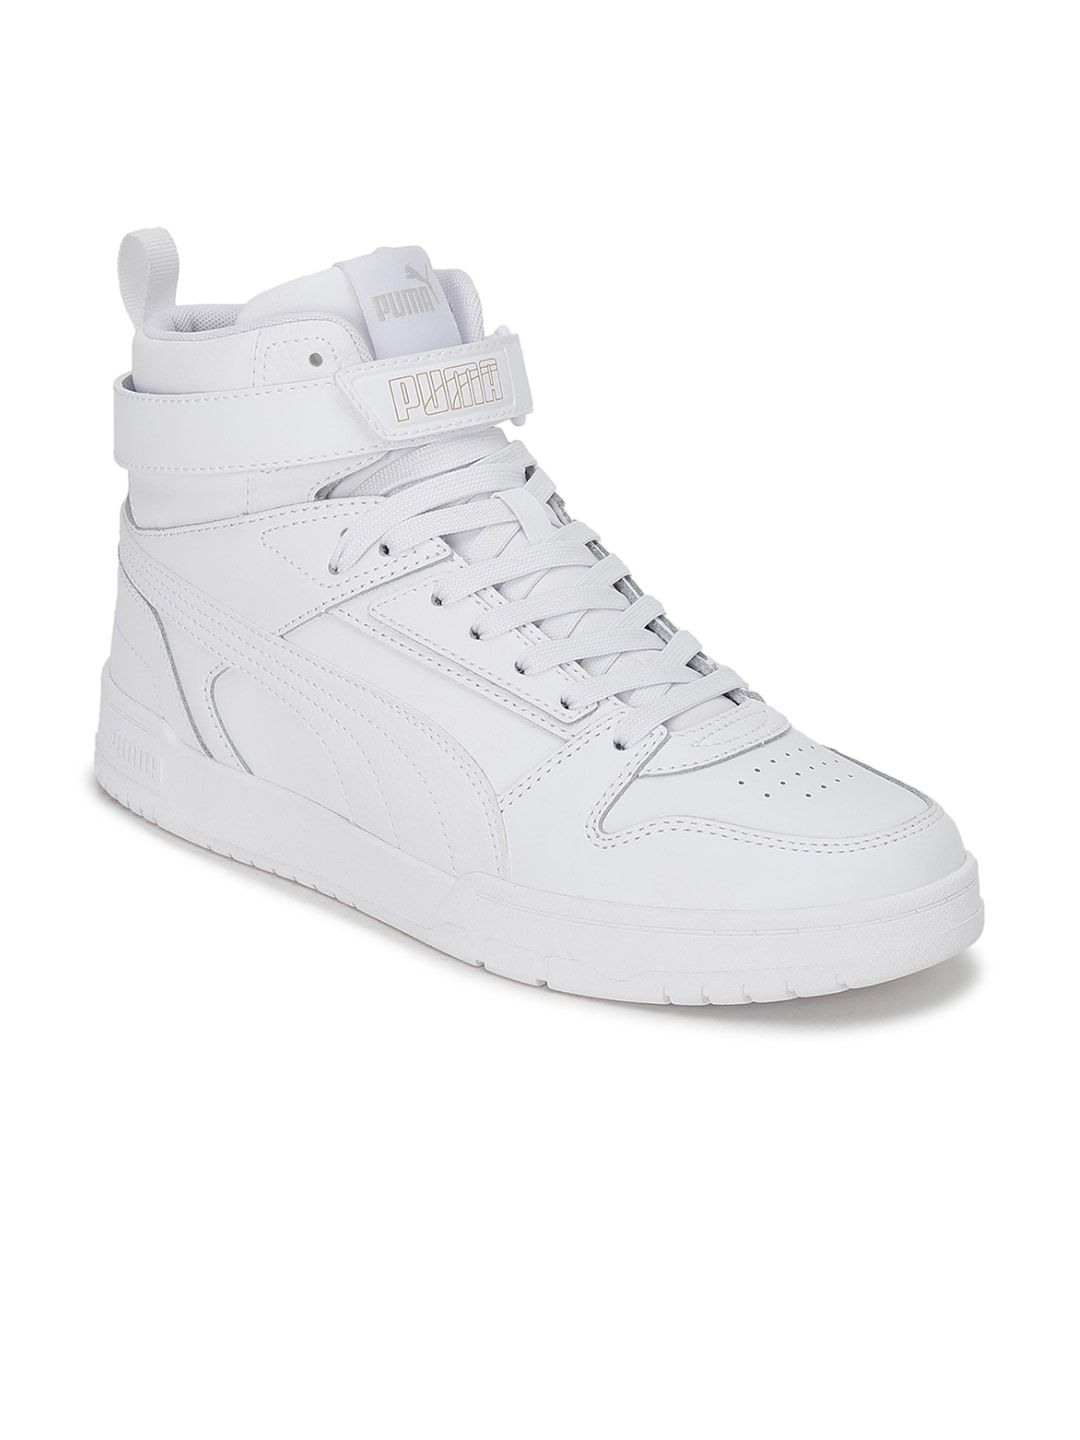 Puma Unisex White Solid High Top Sneakers Price in India